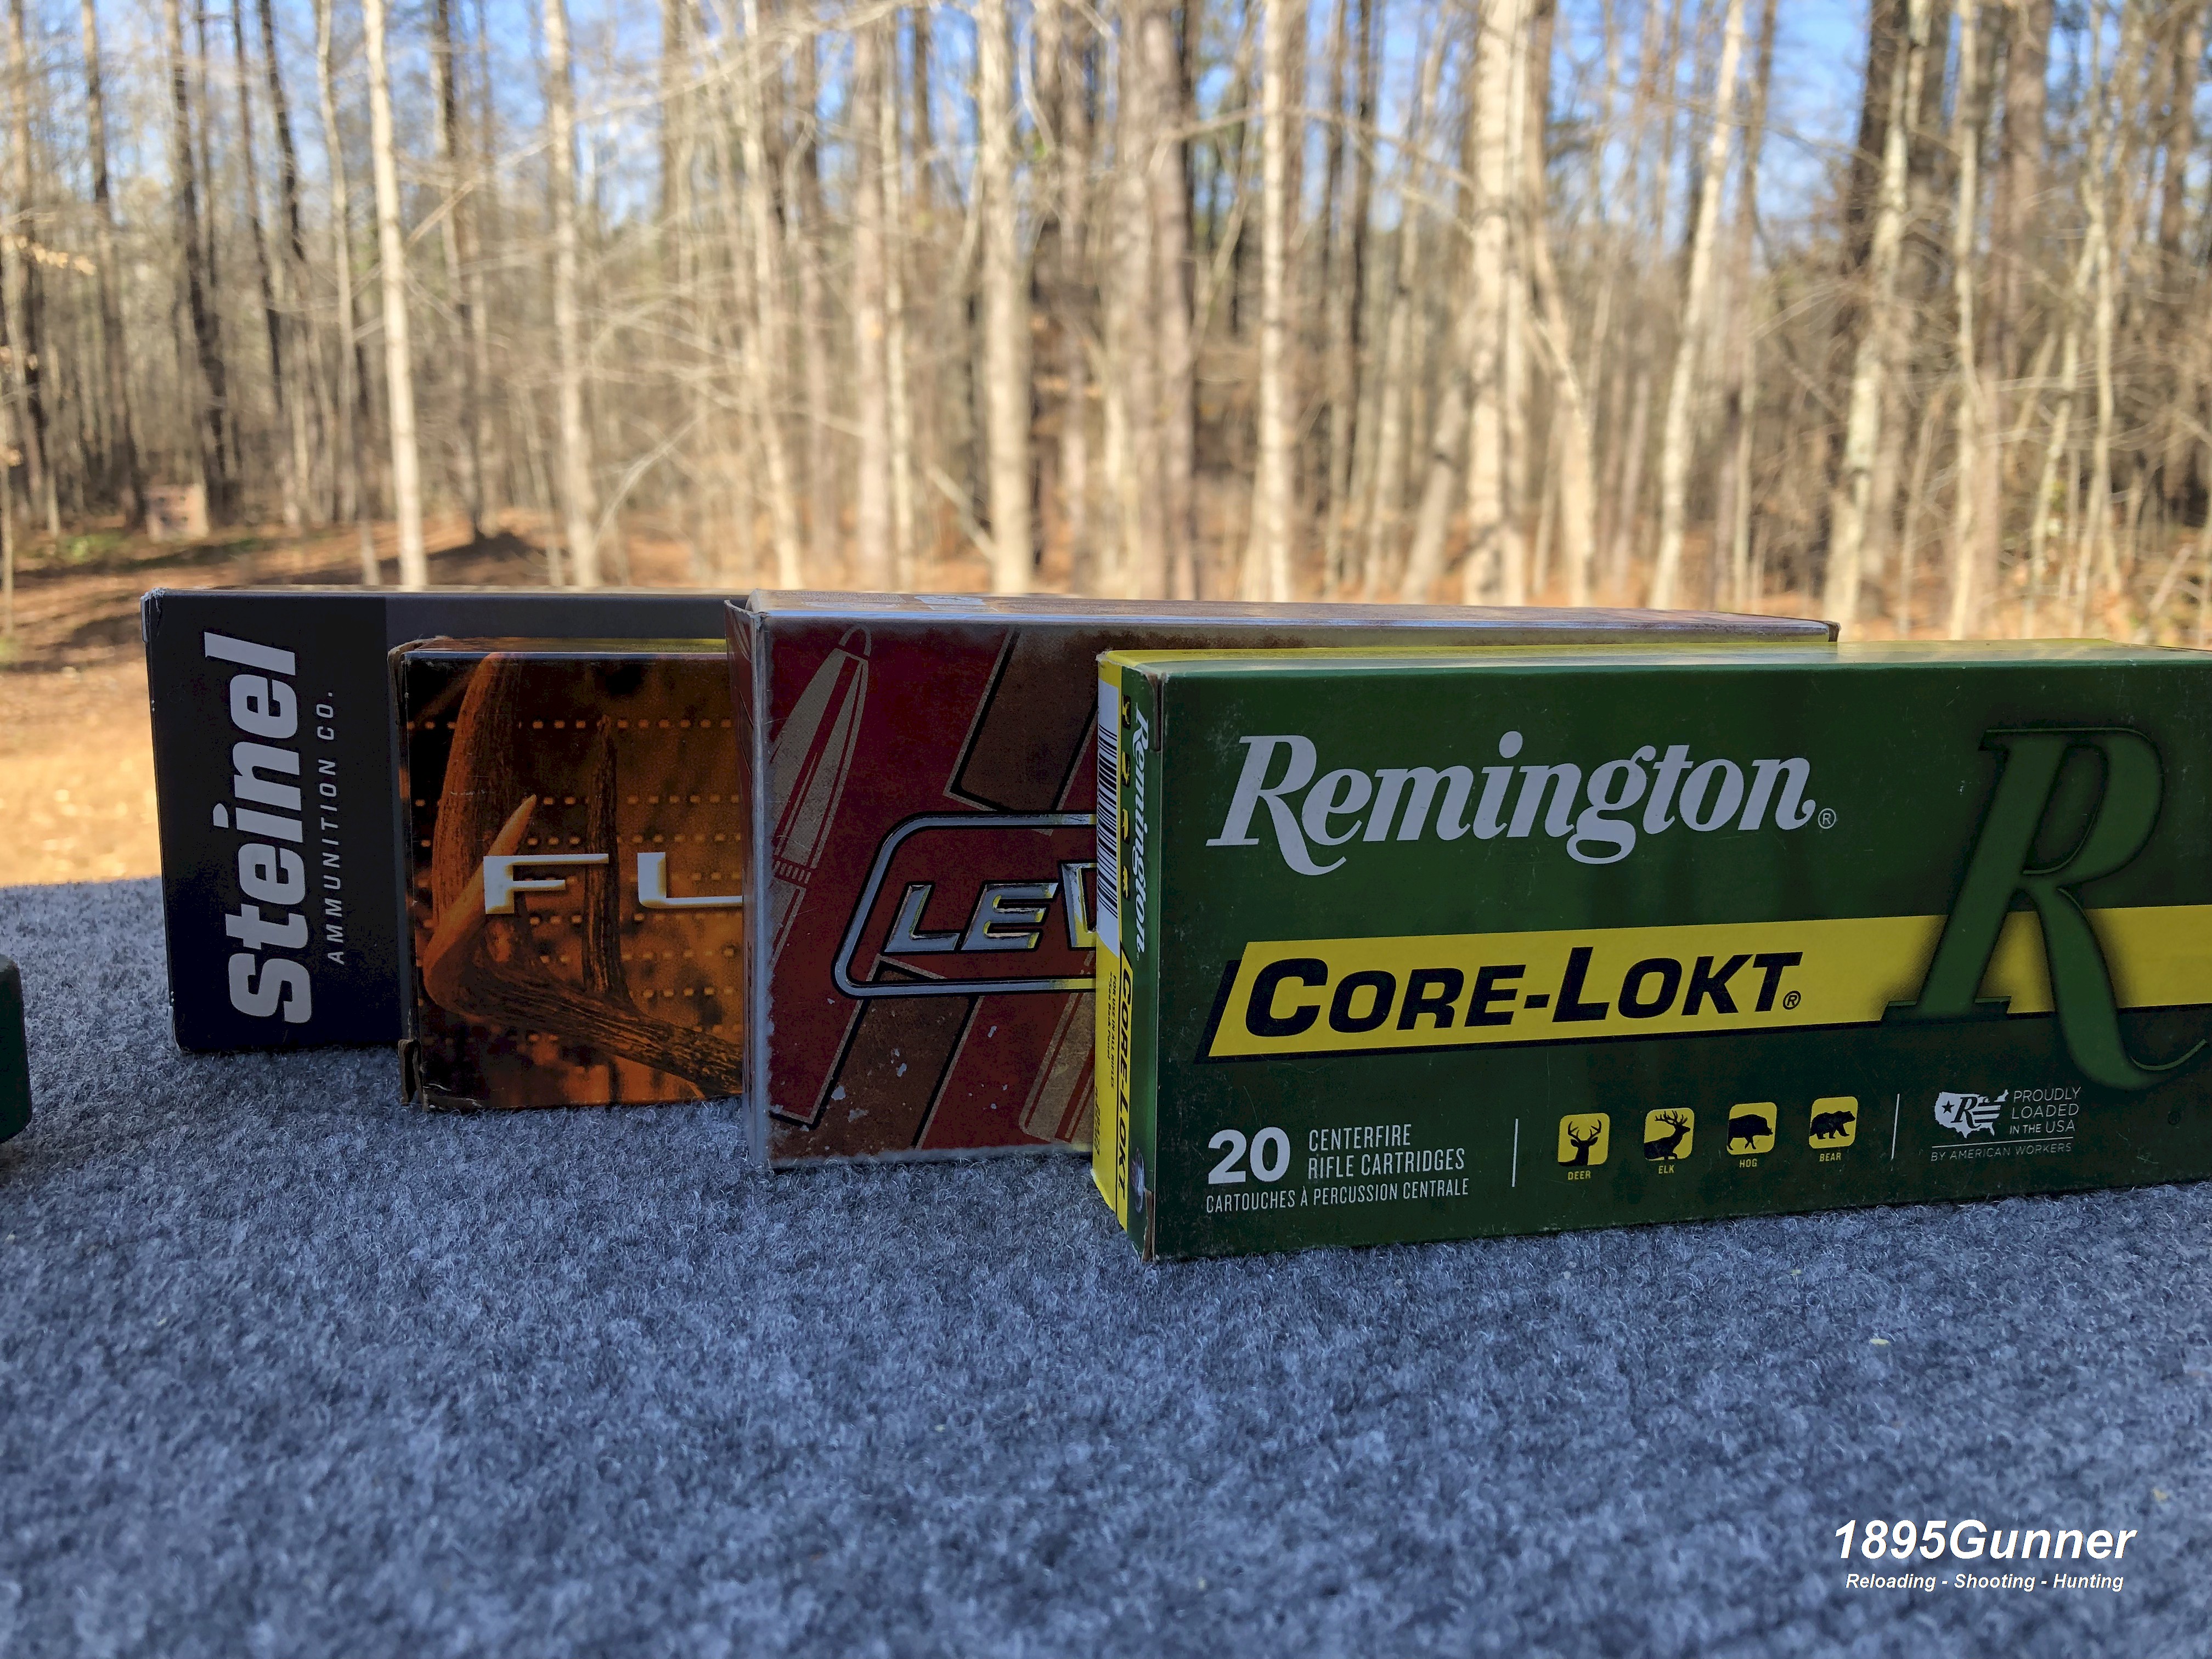 The BoarBuster Test Ammo